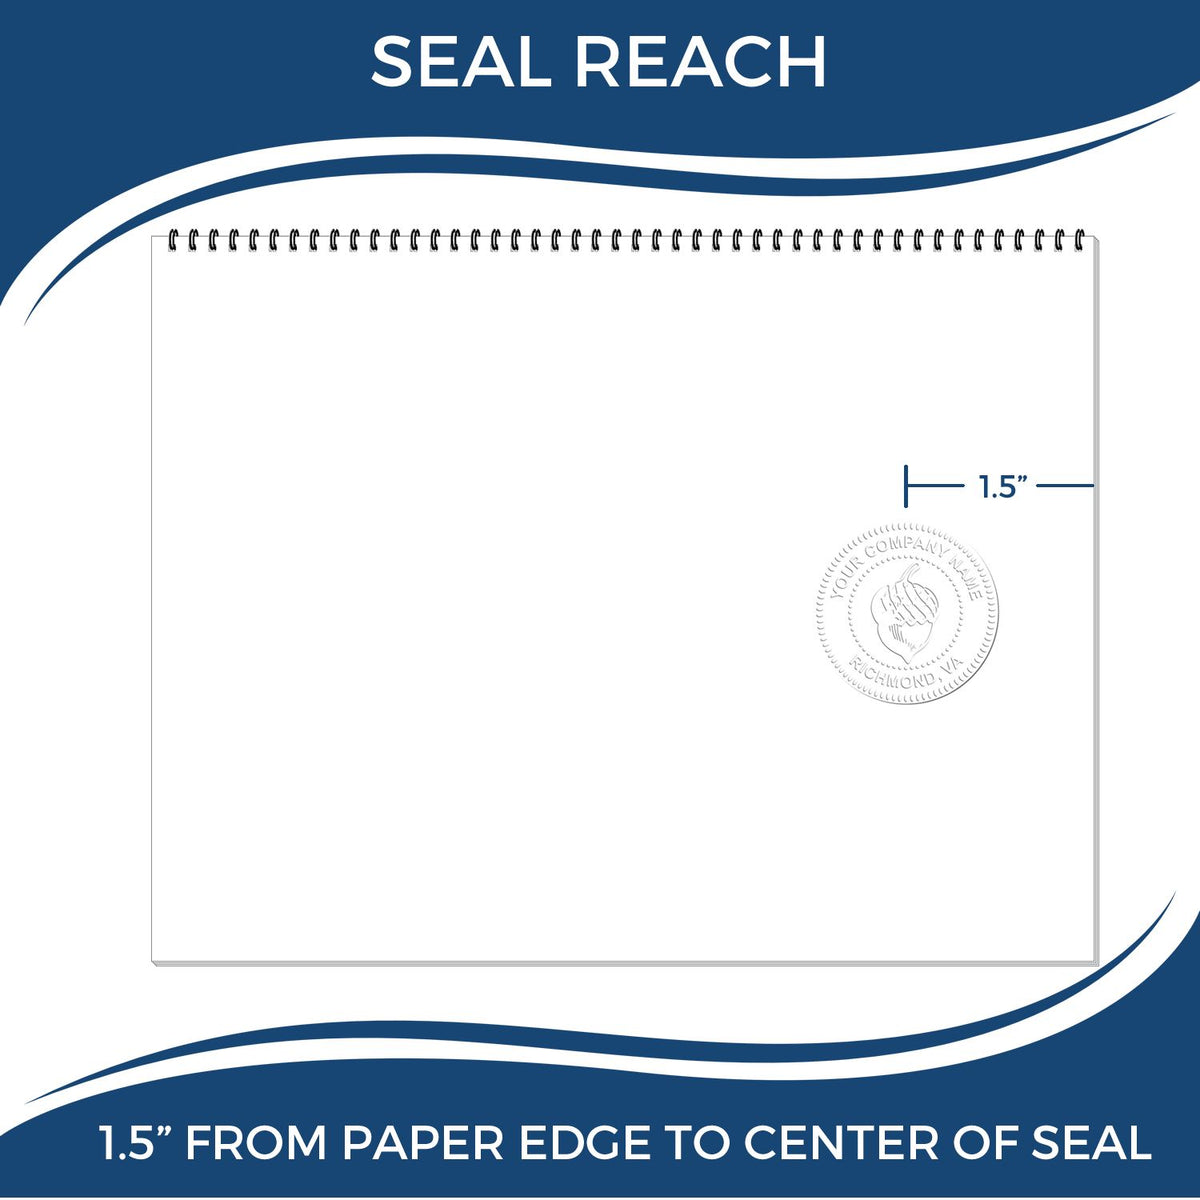 An infographic showing the seal reach which is represented by a ruler and a miniature seal image of the Connecticut Desk Surveyor Seal Embosser